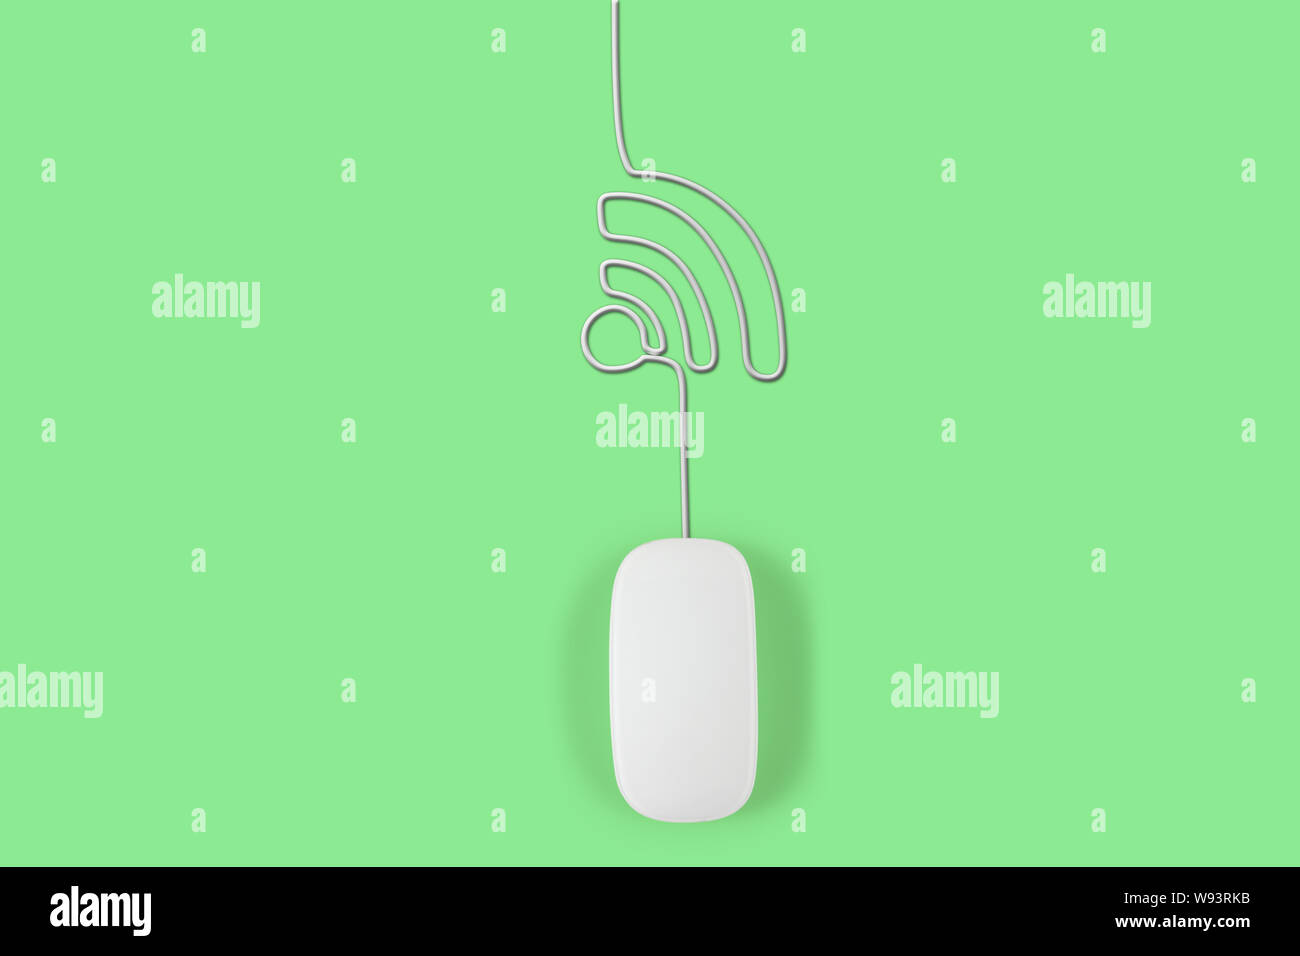 Computer mouse with its wire making wi-fi symbol Stock Photo